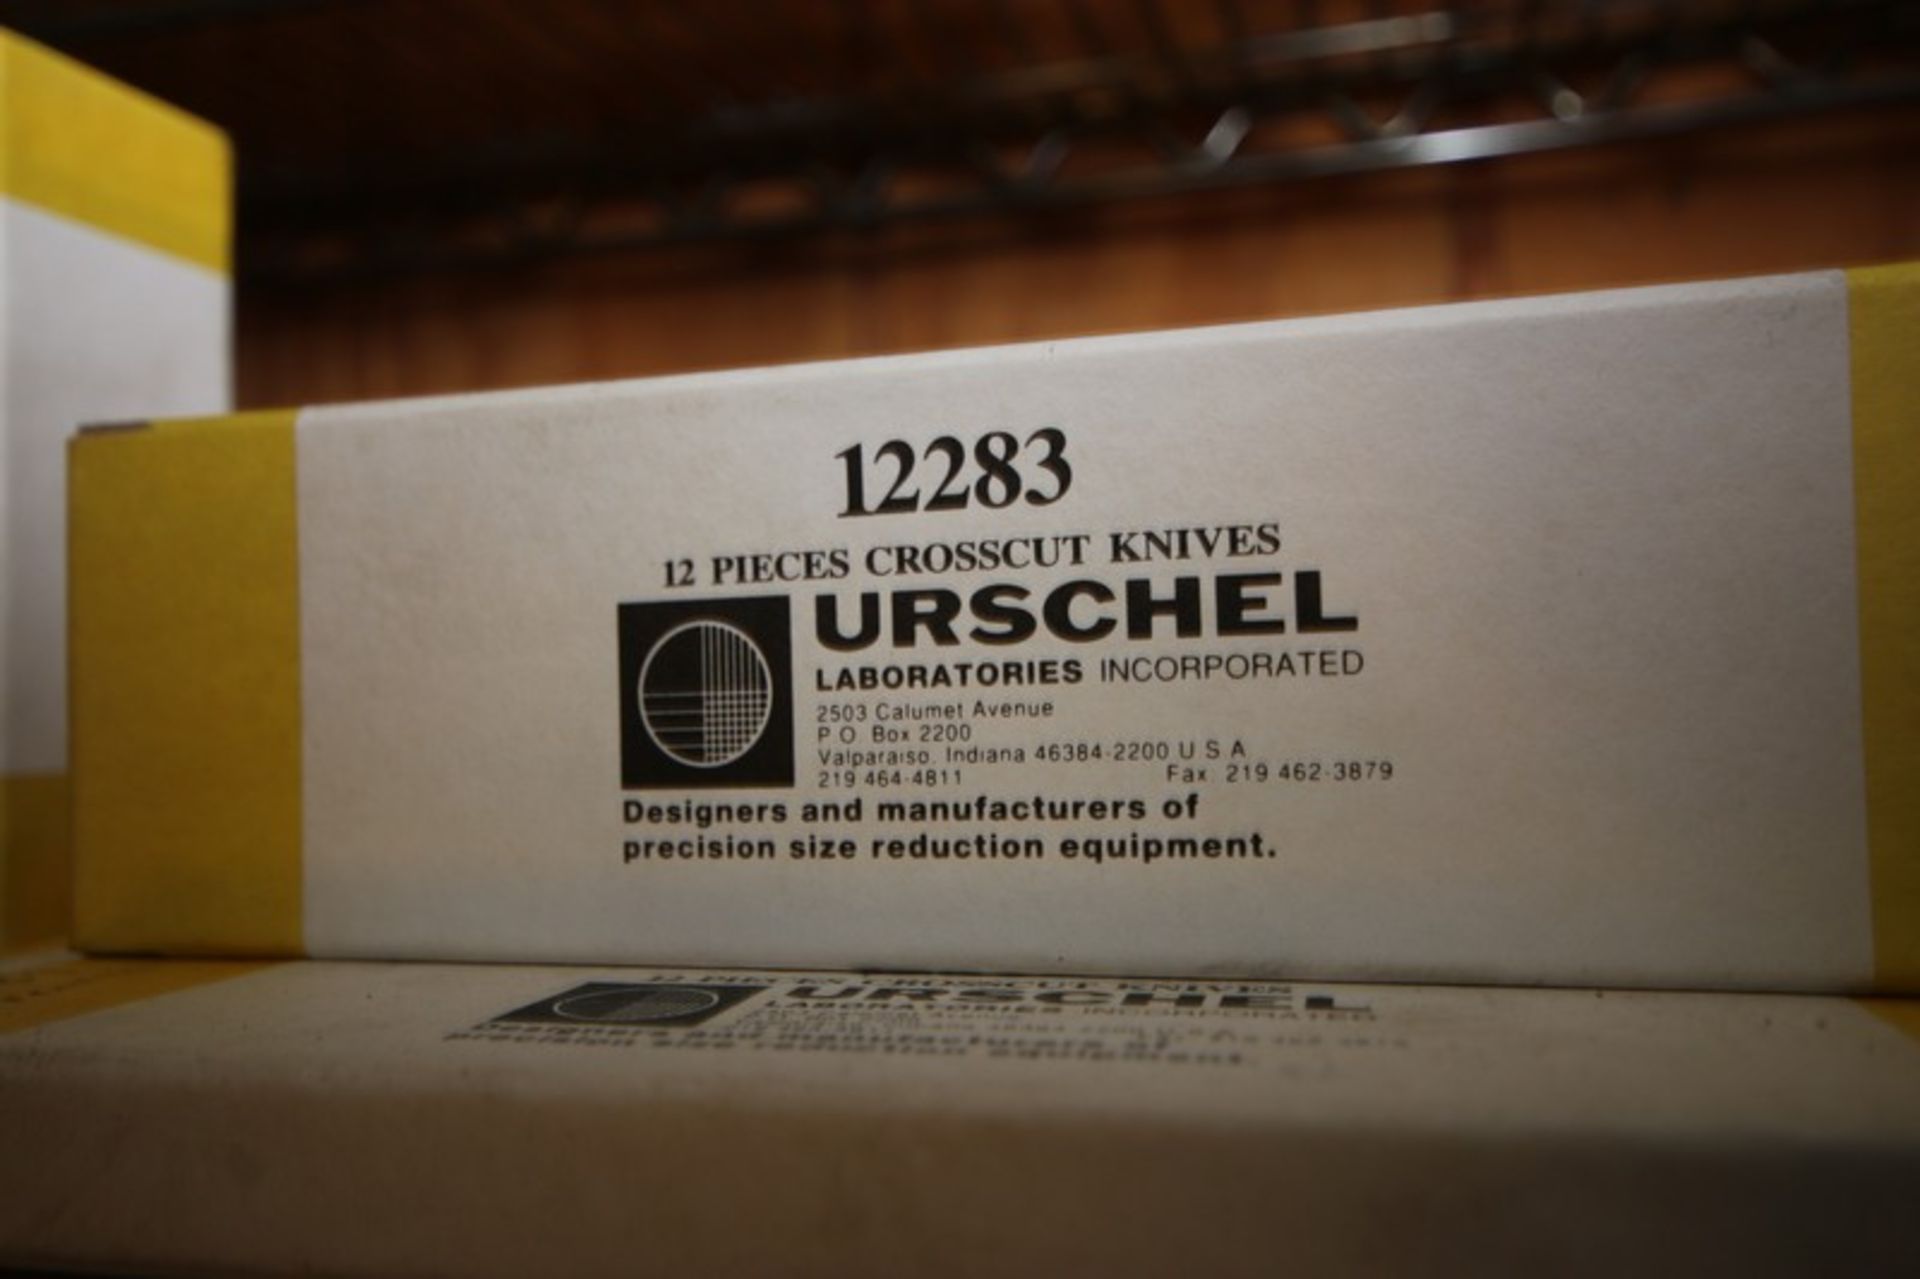 (13) BOXES OF URSCHEL CROSSCUT KNIVES,PART NO. 12283 (INV#80900)(Located @ the MDG Auction